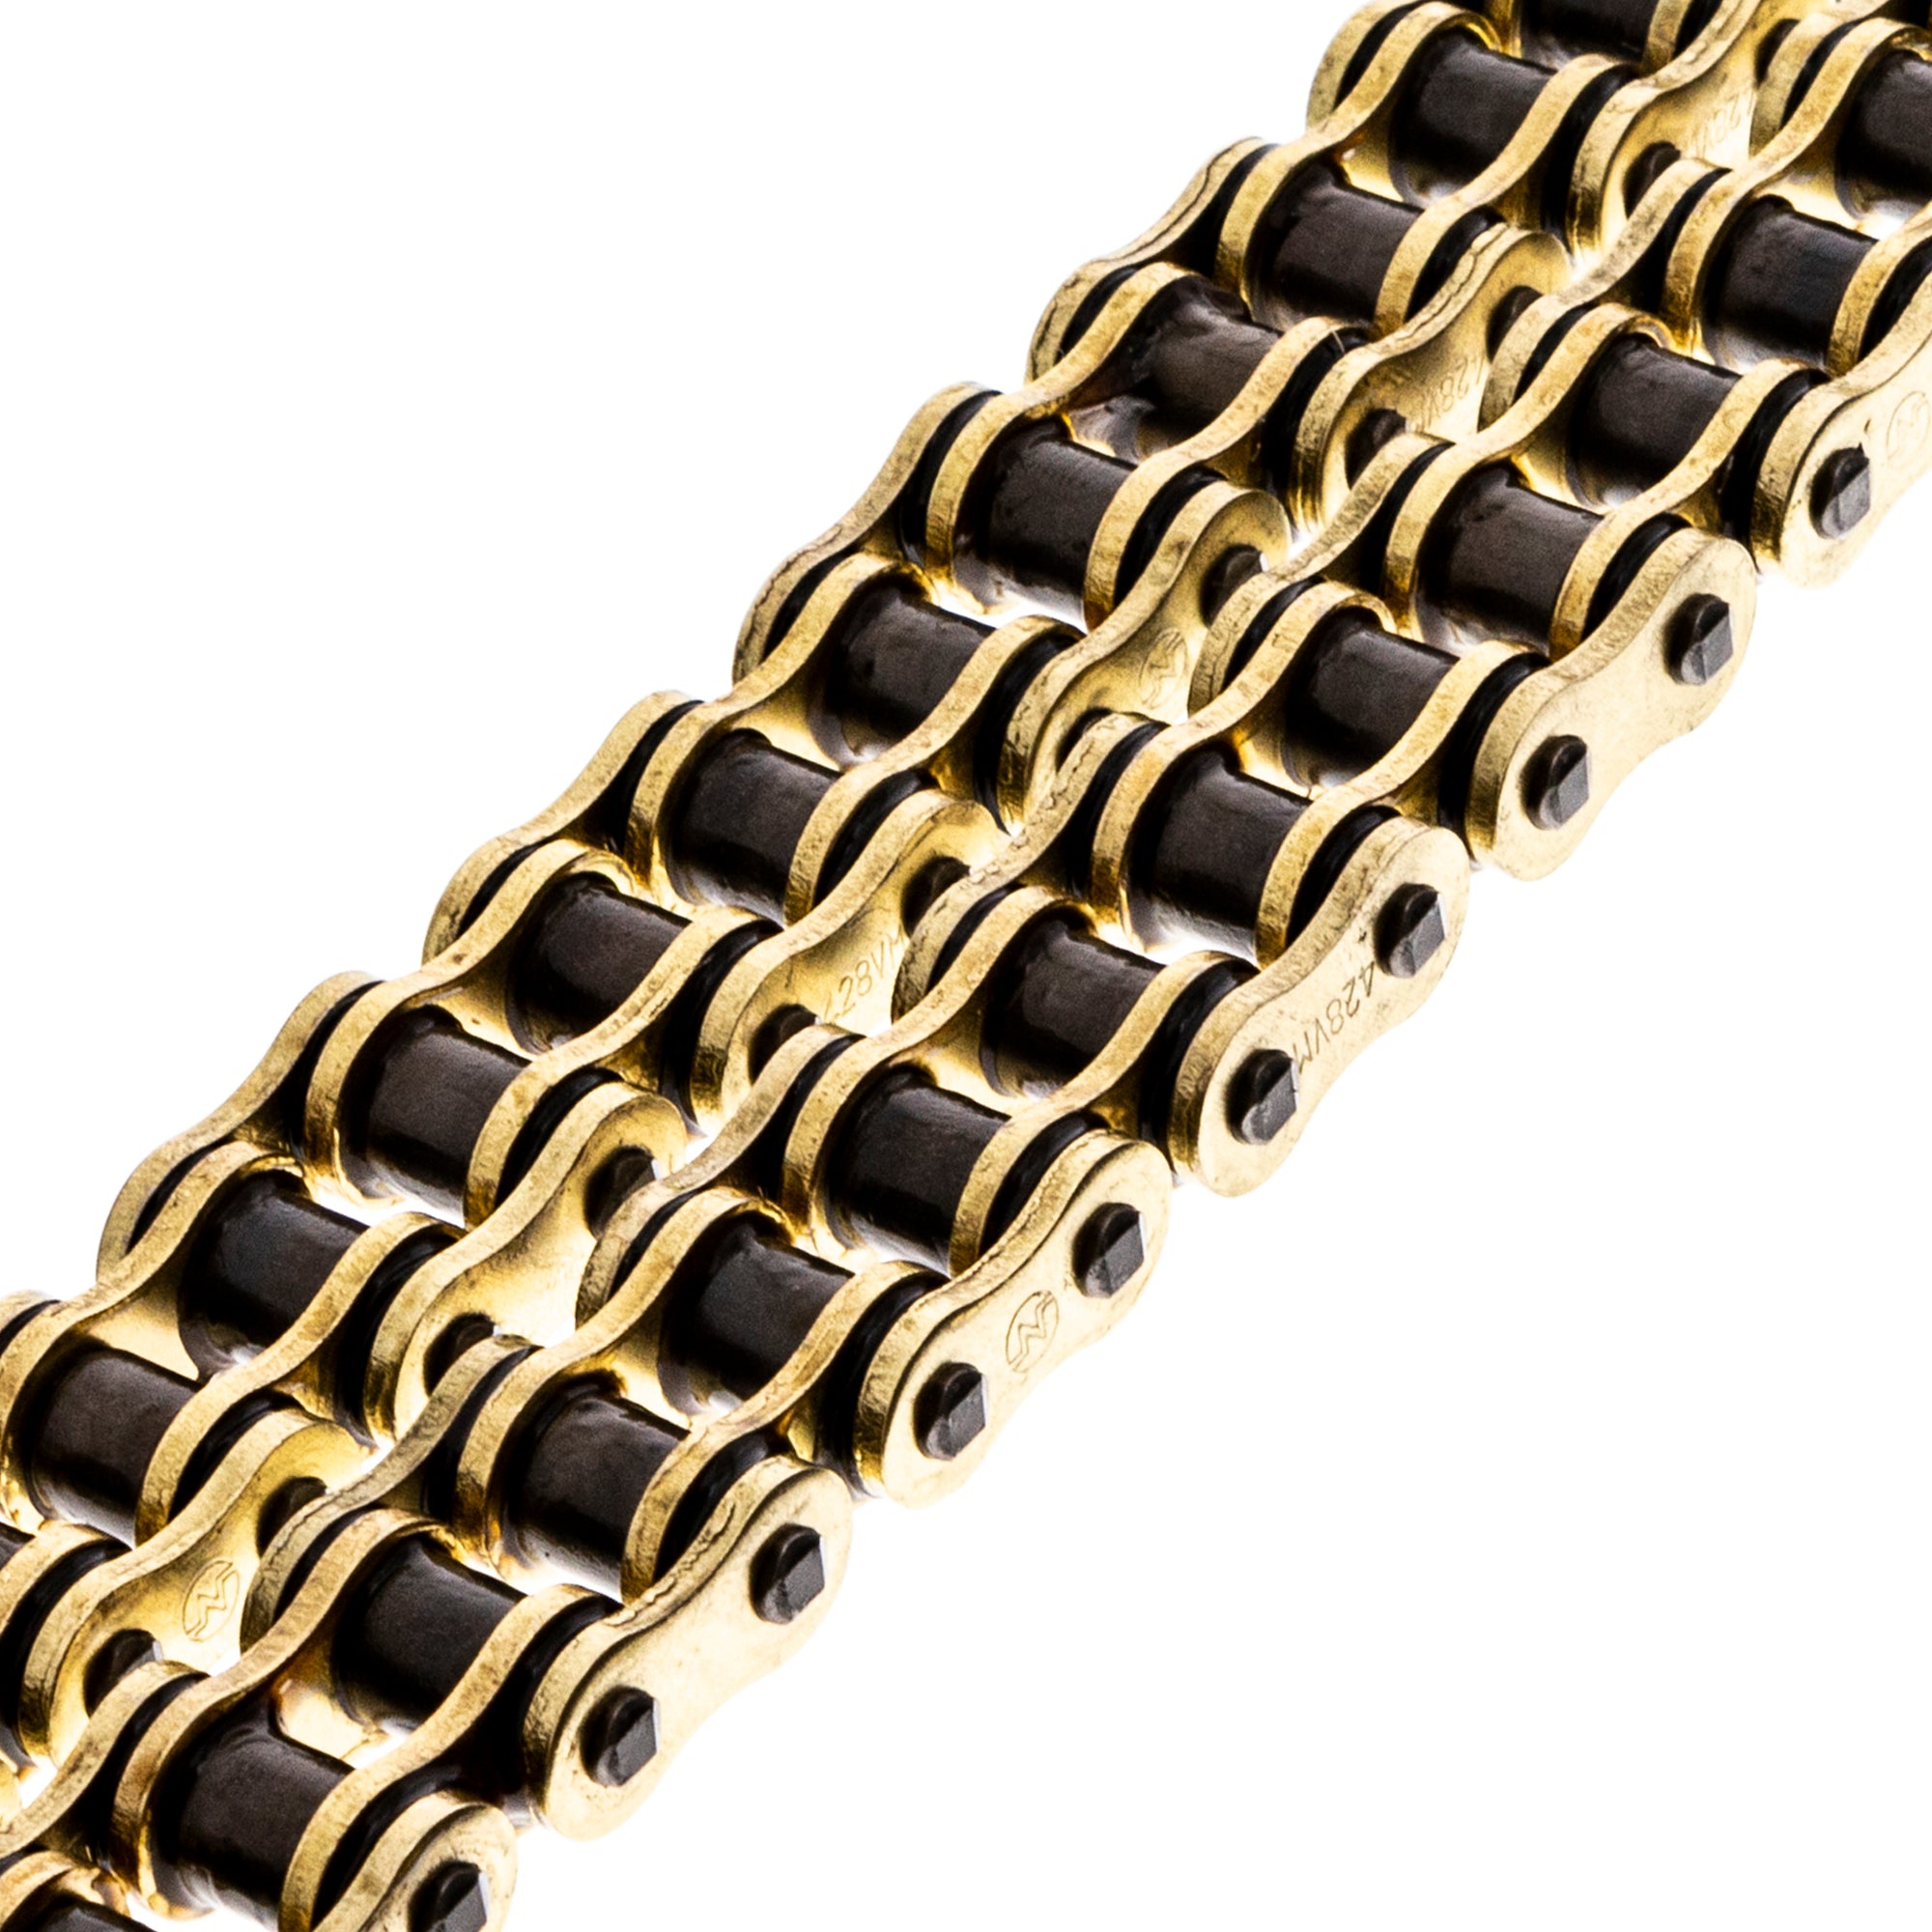 Gold X-Ring Chain 86 w/ Master Link for zOTHER ATC90 ATC110 405W3-121-505 NICHE 519-CDC2509H